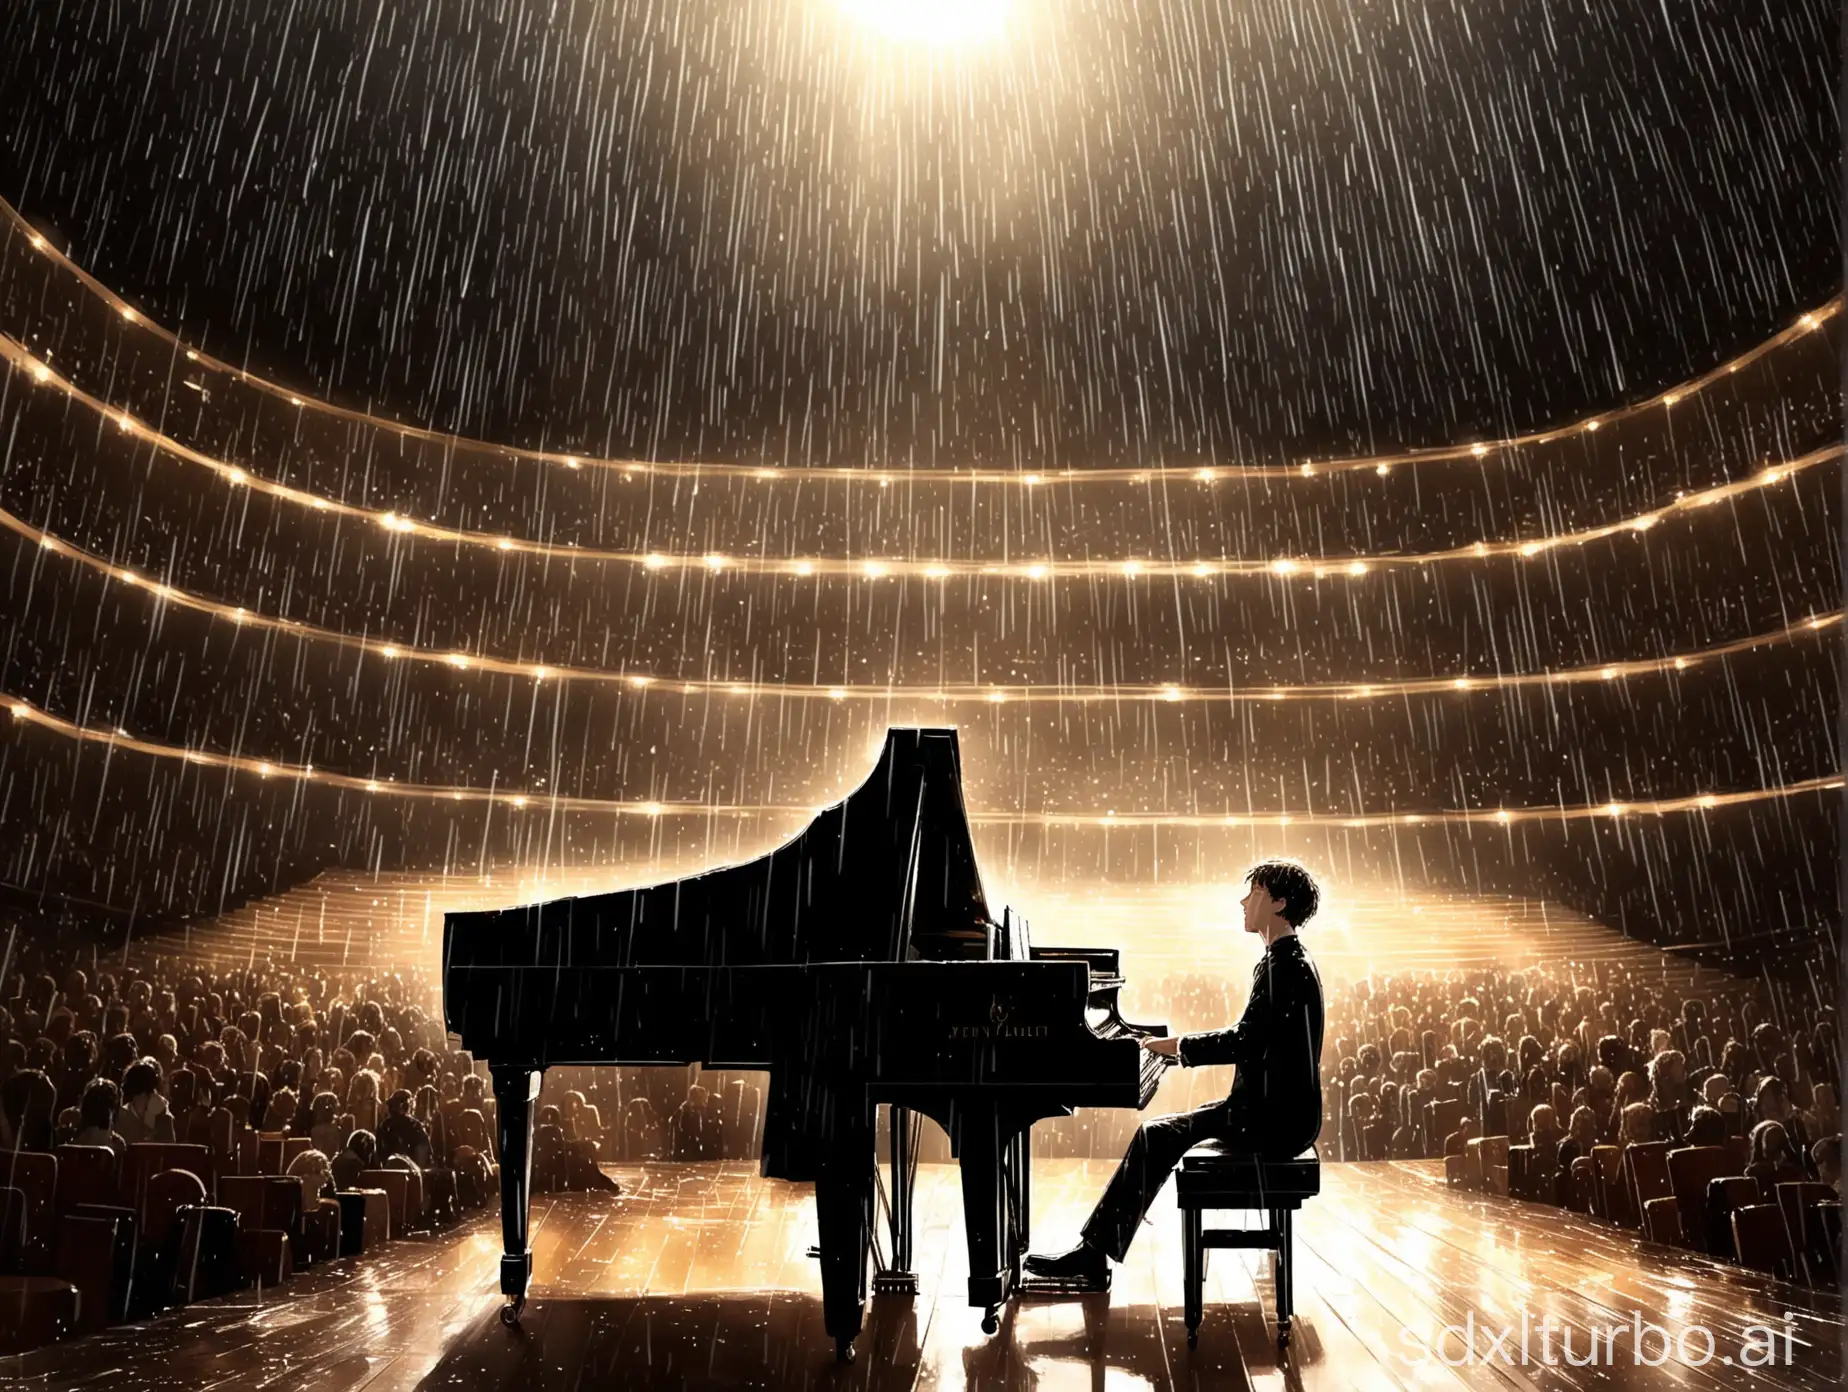 Pianist-Concludes-Emotional-Performance-as-Sun-Breaks-Through-Rainy-Skies